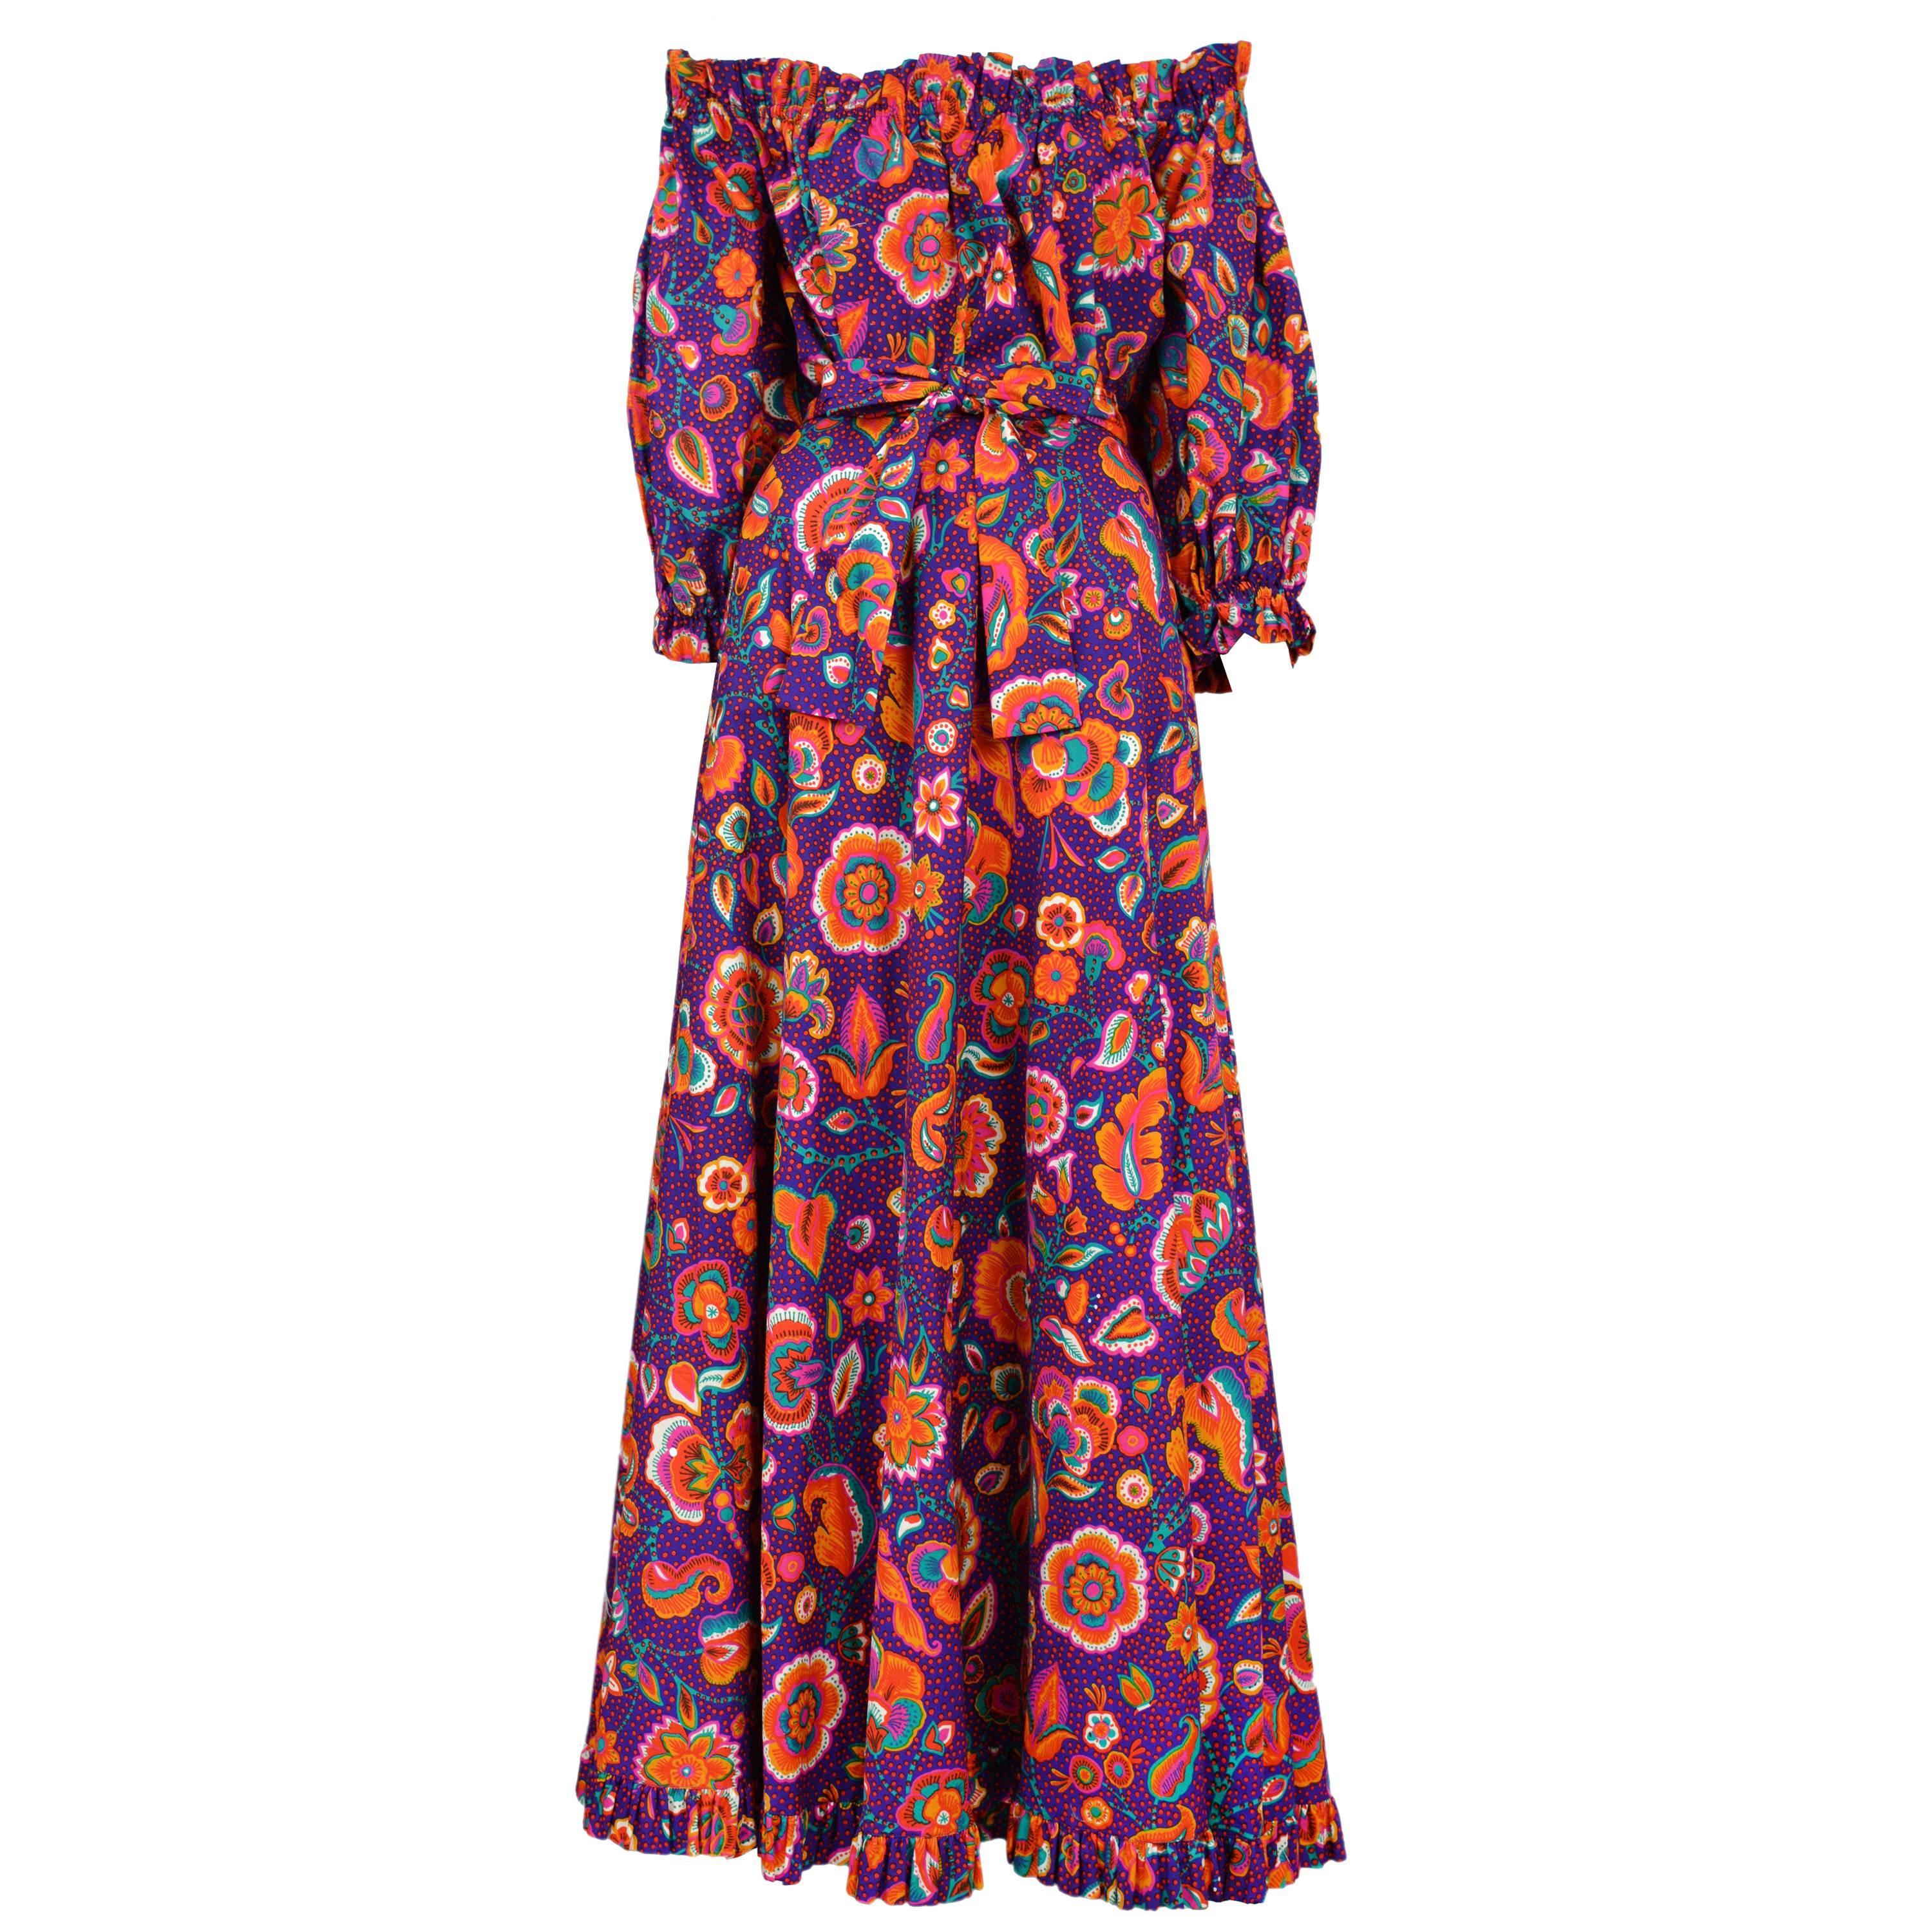 Vintage Yves Saint Laurent two piece ensemble featuring a gathered off the shoulder peasant blouse and a matching skirt with a ruffle flounce, both covered in a purple and red floral print.
Please inquire for additional images.